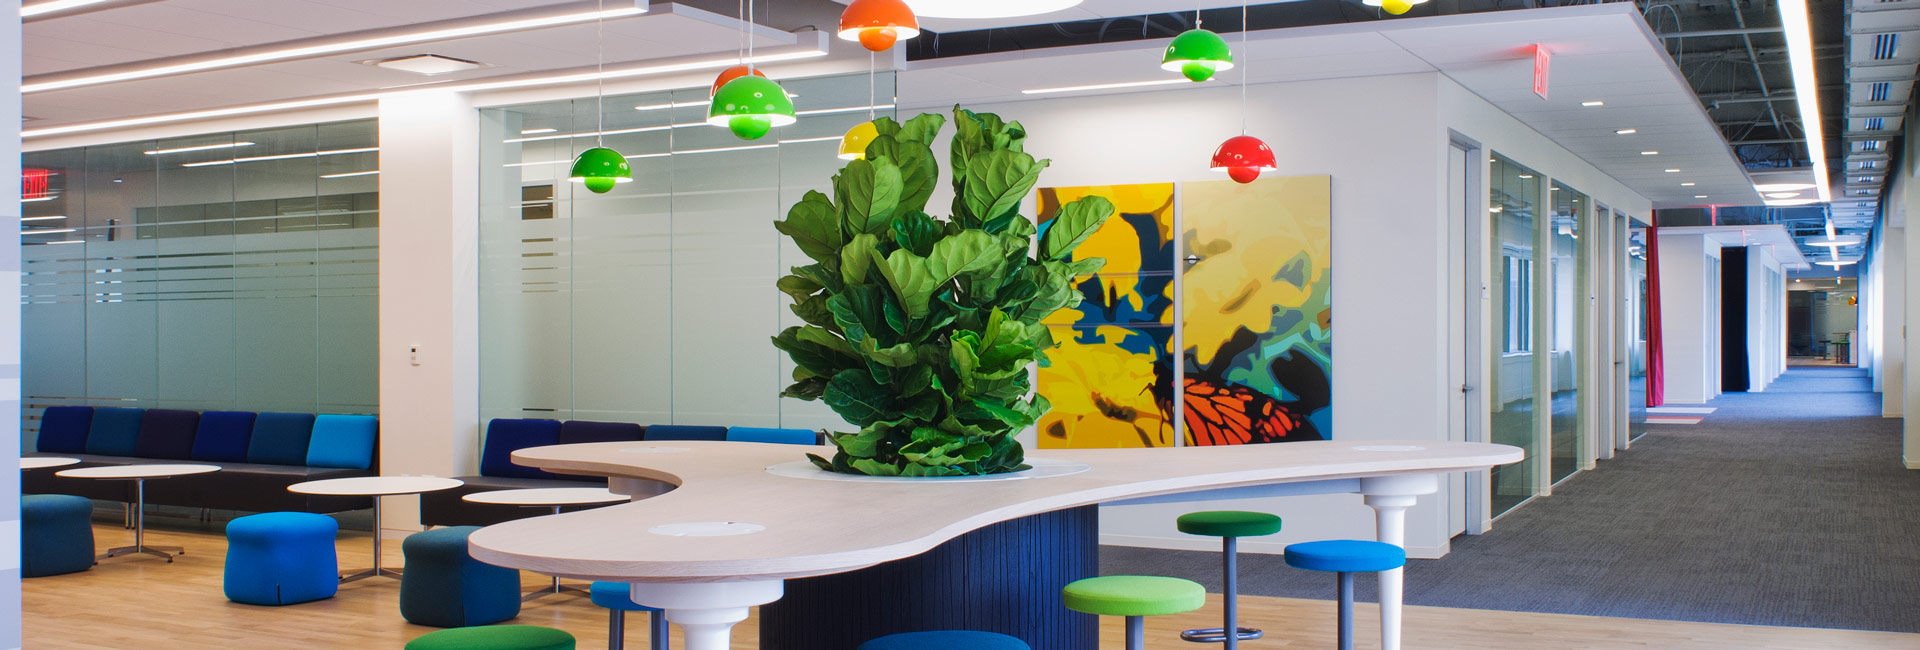 Ericsson uses vibrant colors throughout their corporate office space